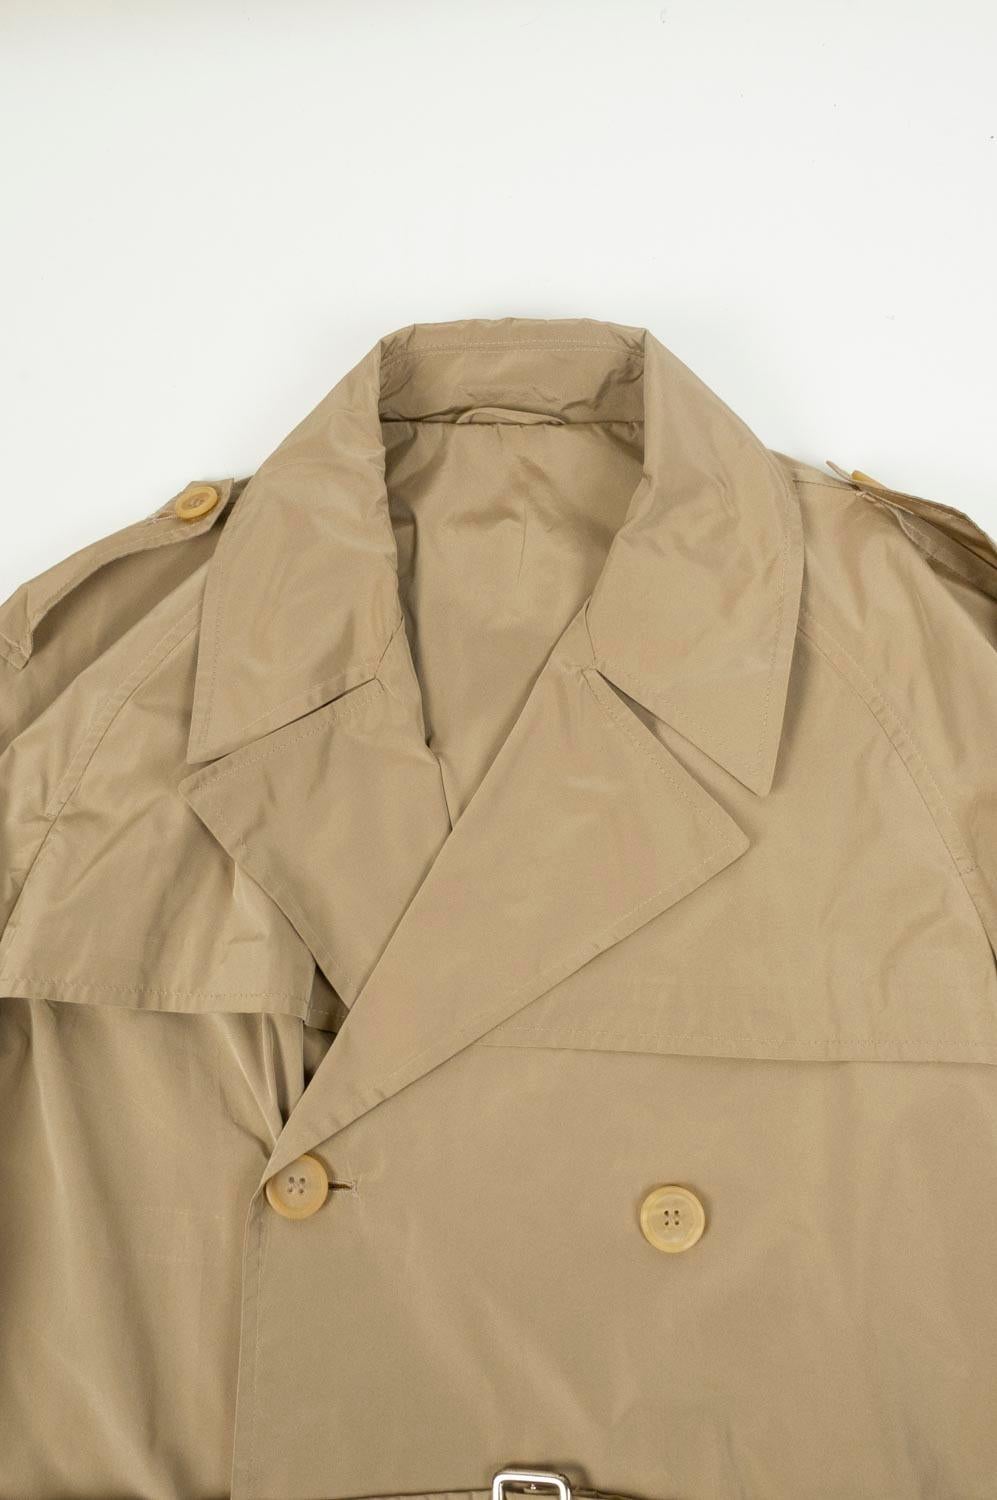 Item for sale is 100% genuine Jil Sander Trench Coat by Raf Simons, S427
Color: Light Shinny Brown
(An actual color may a bit vary due to individual computer screen interpretation)
Material: 100% polyester
Tag size: 44 runs Large
This coat is great